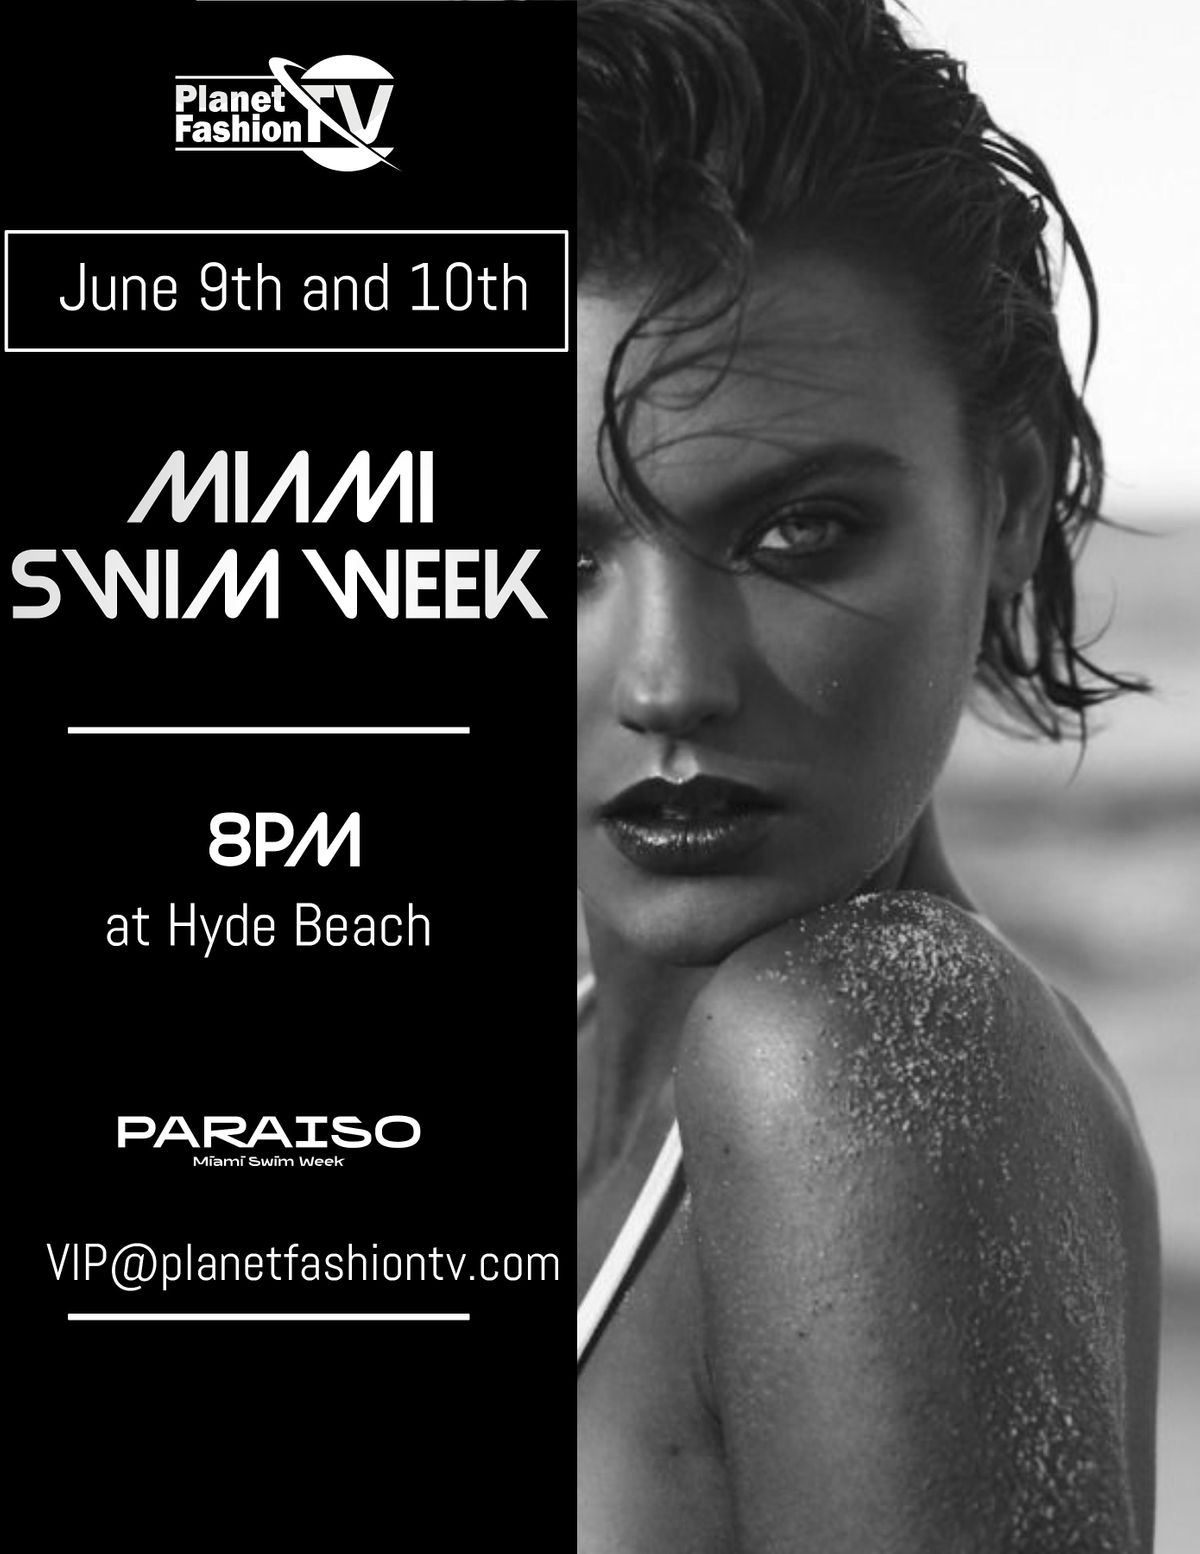 Miami Swim Week June 9th and 10th